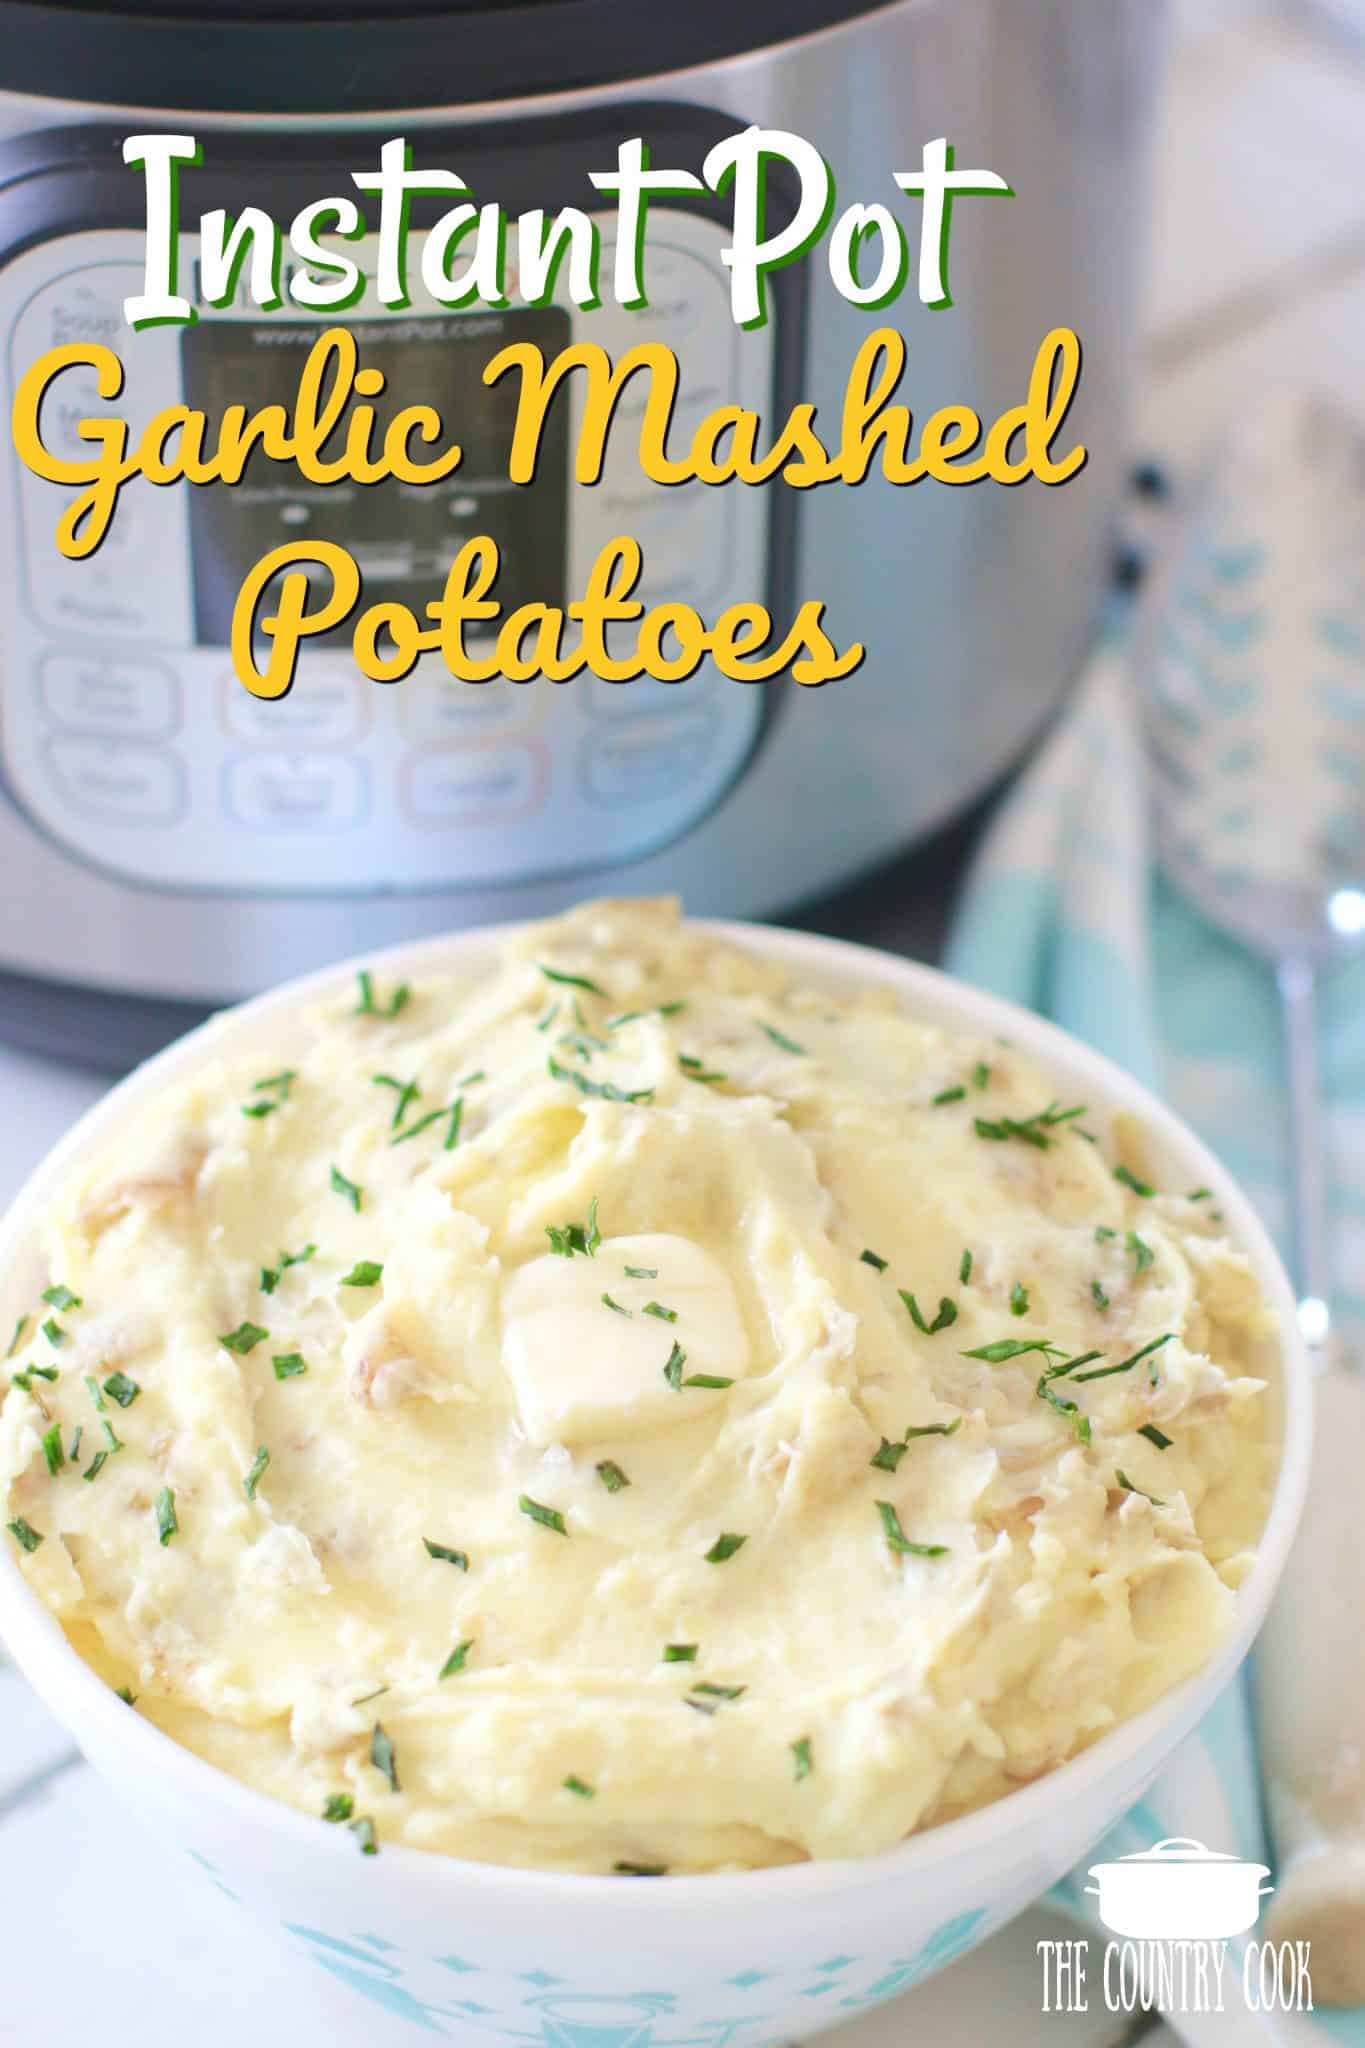 Instant Pot Garlic Mashed Potatoes recipe from The Country Cook